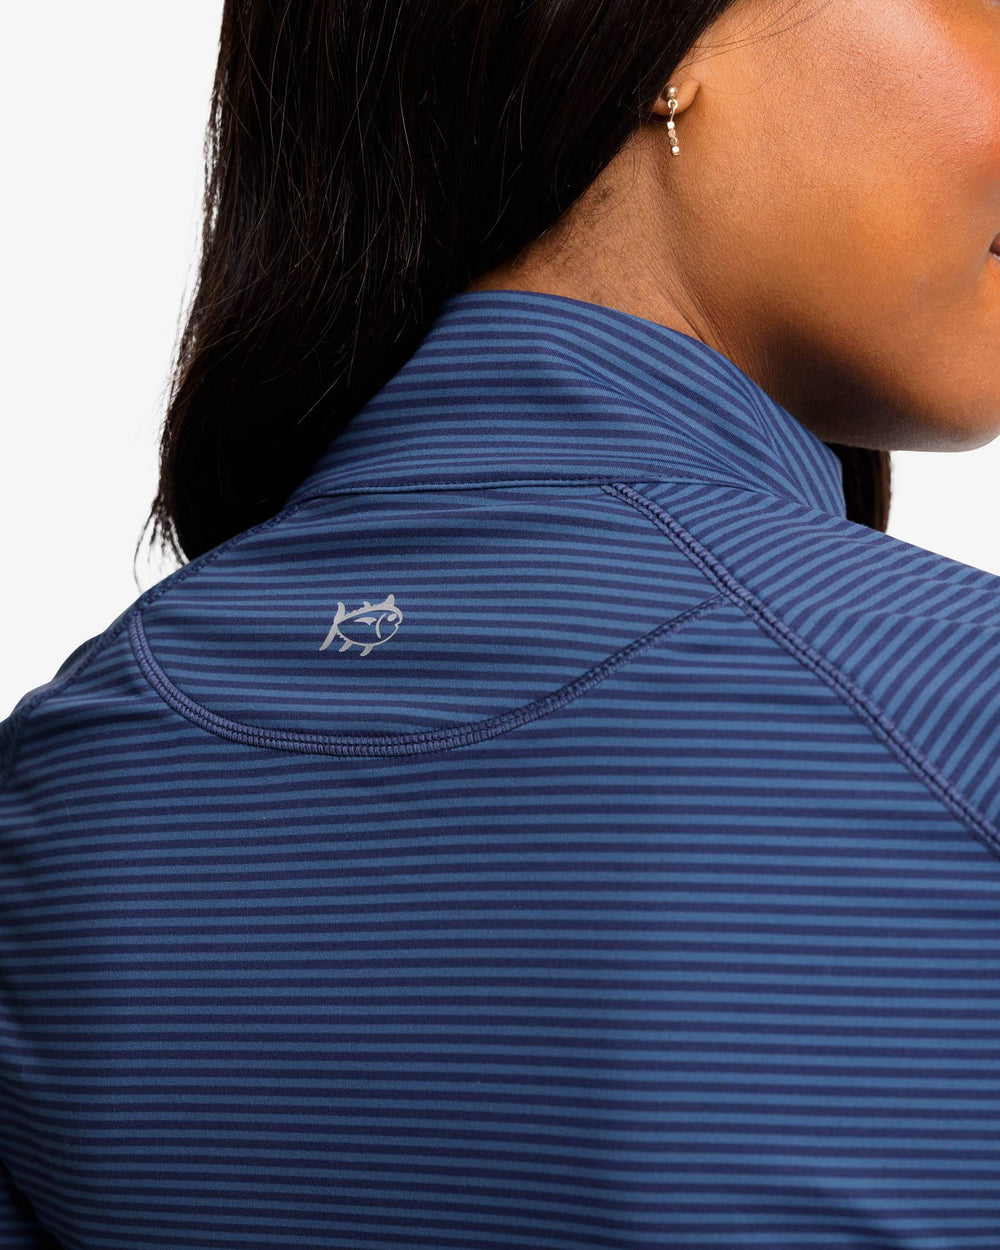 The yoke view of the Runaround Performance Quarter Zip Pullover by Southern Tide - Nautical Navy